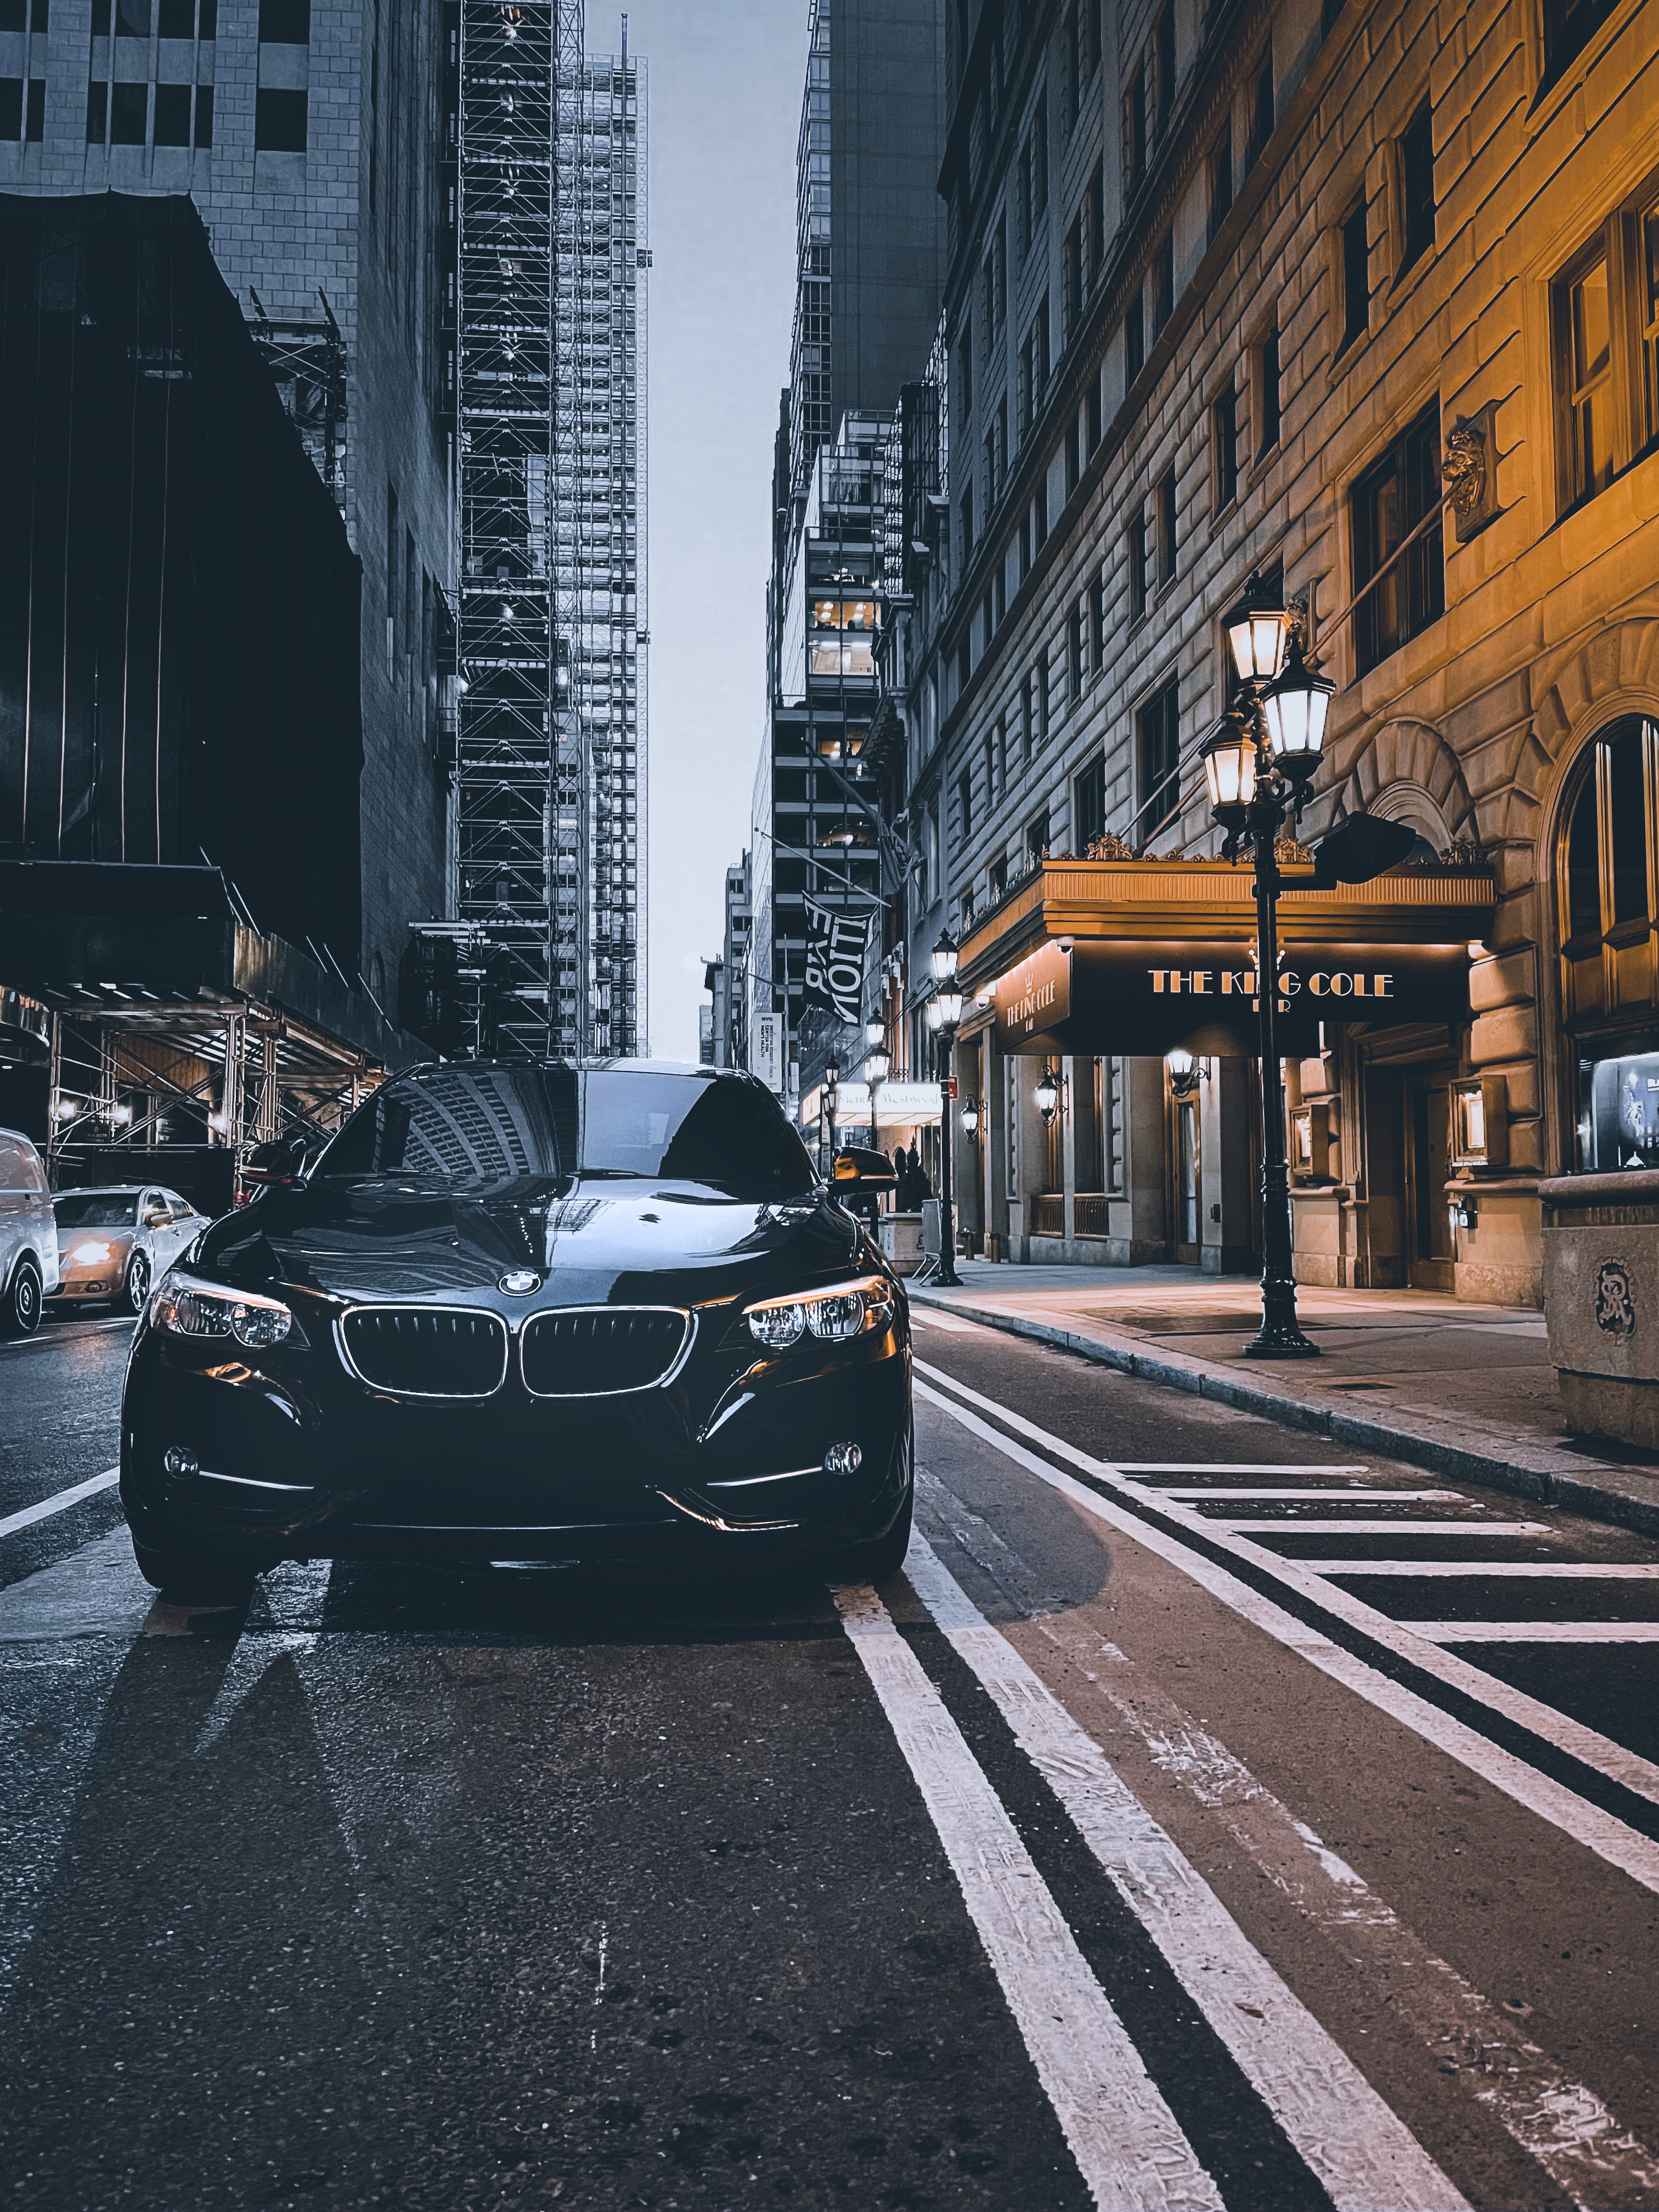 Popular Bmw Image for Phone